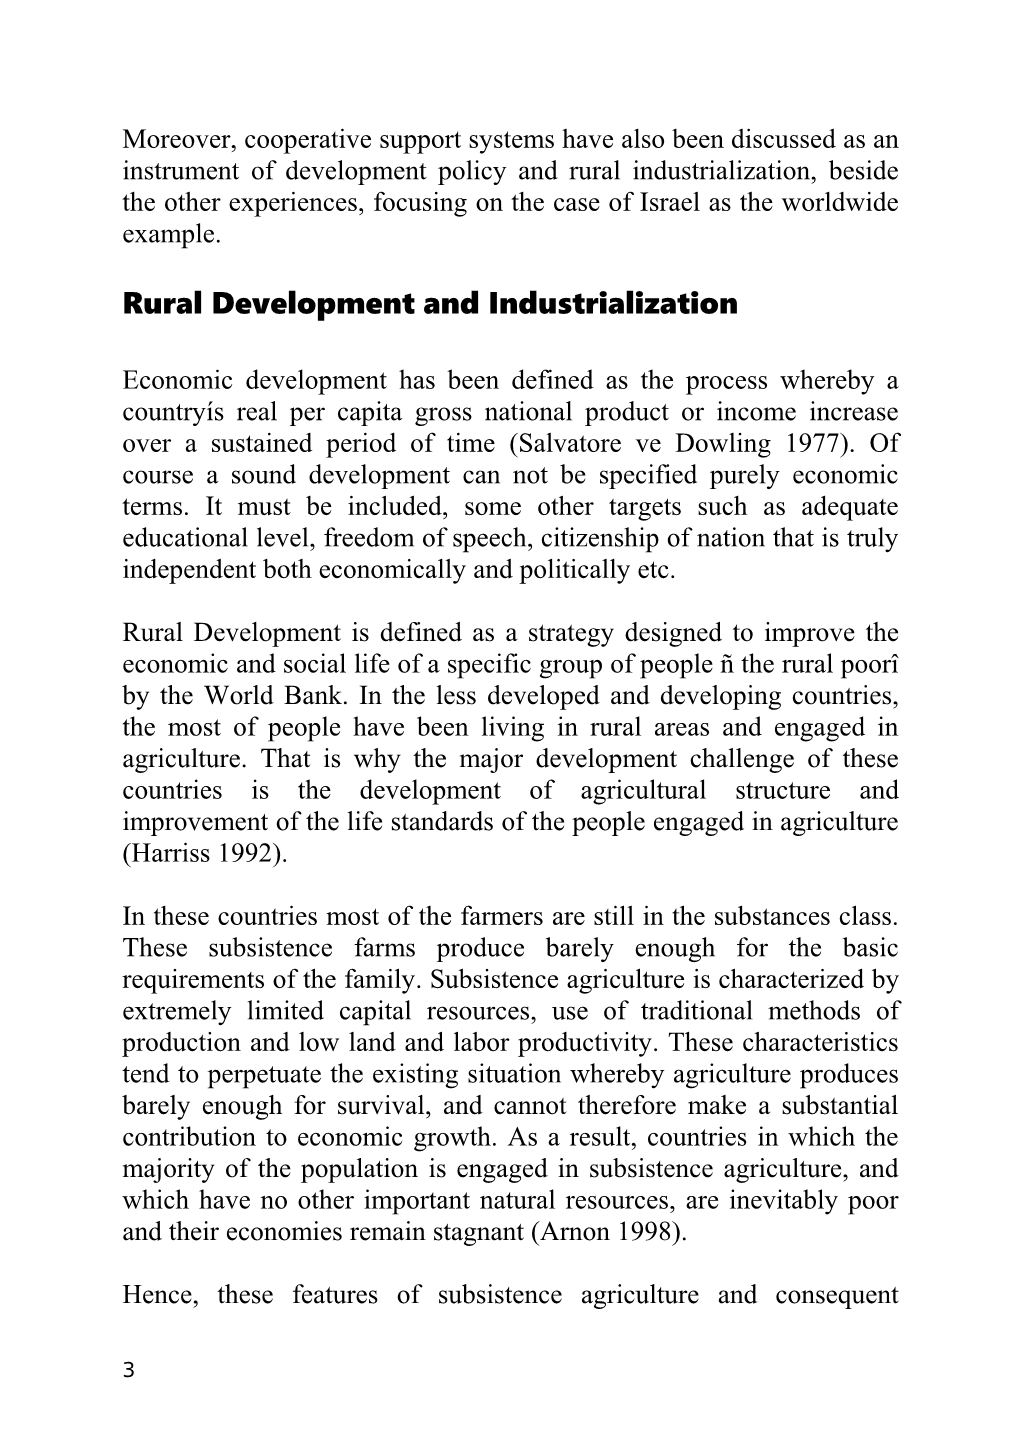 Cooperative Support Systems for Rural Industrialization